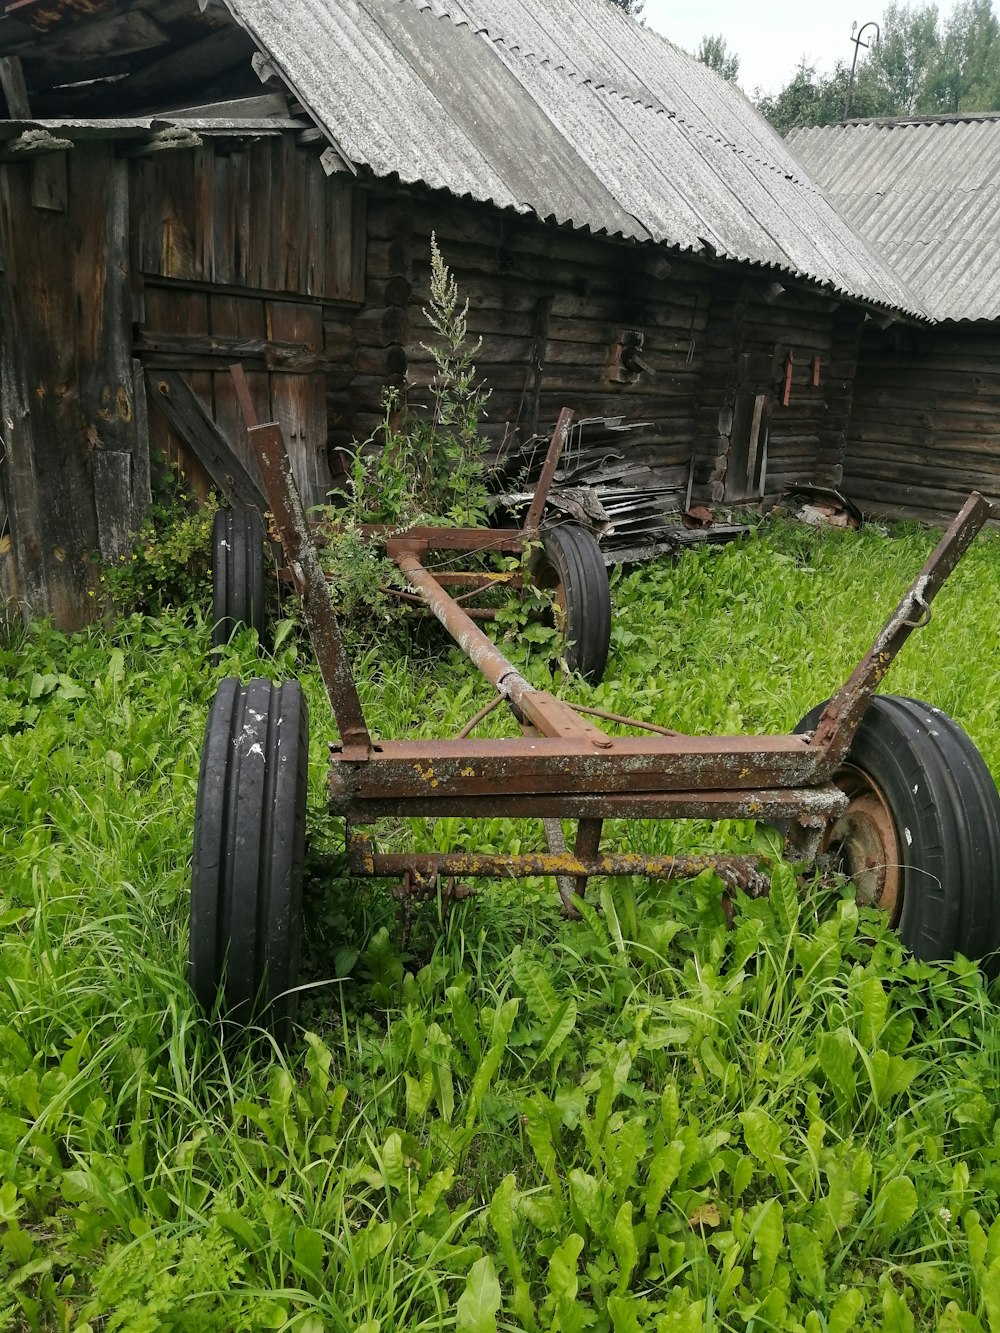 a wooden cart in front of a barn